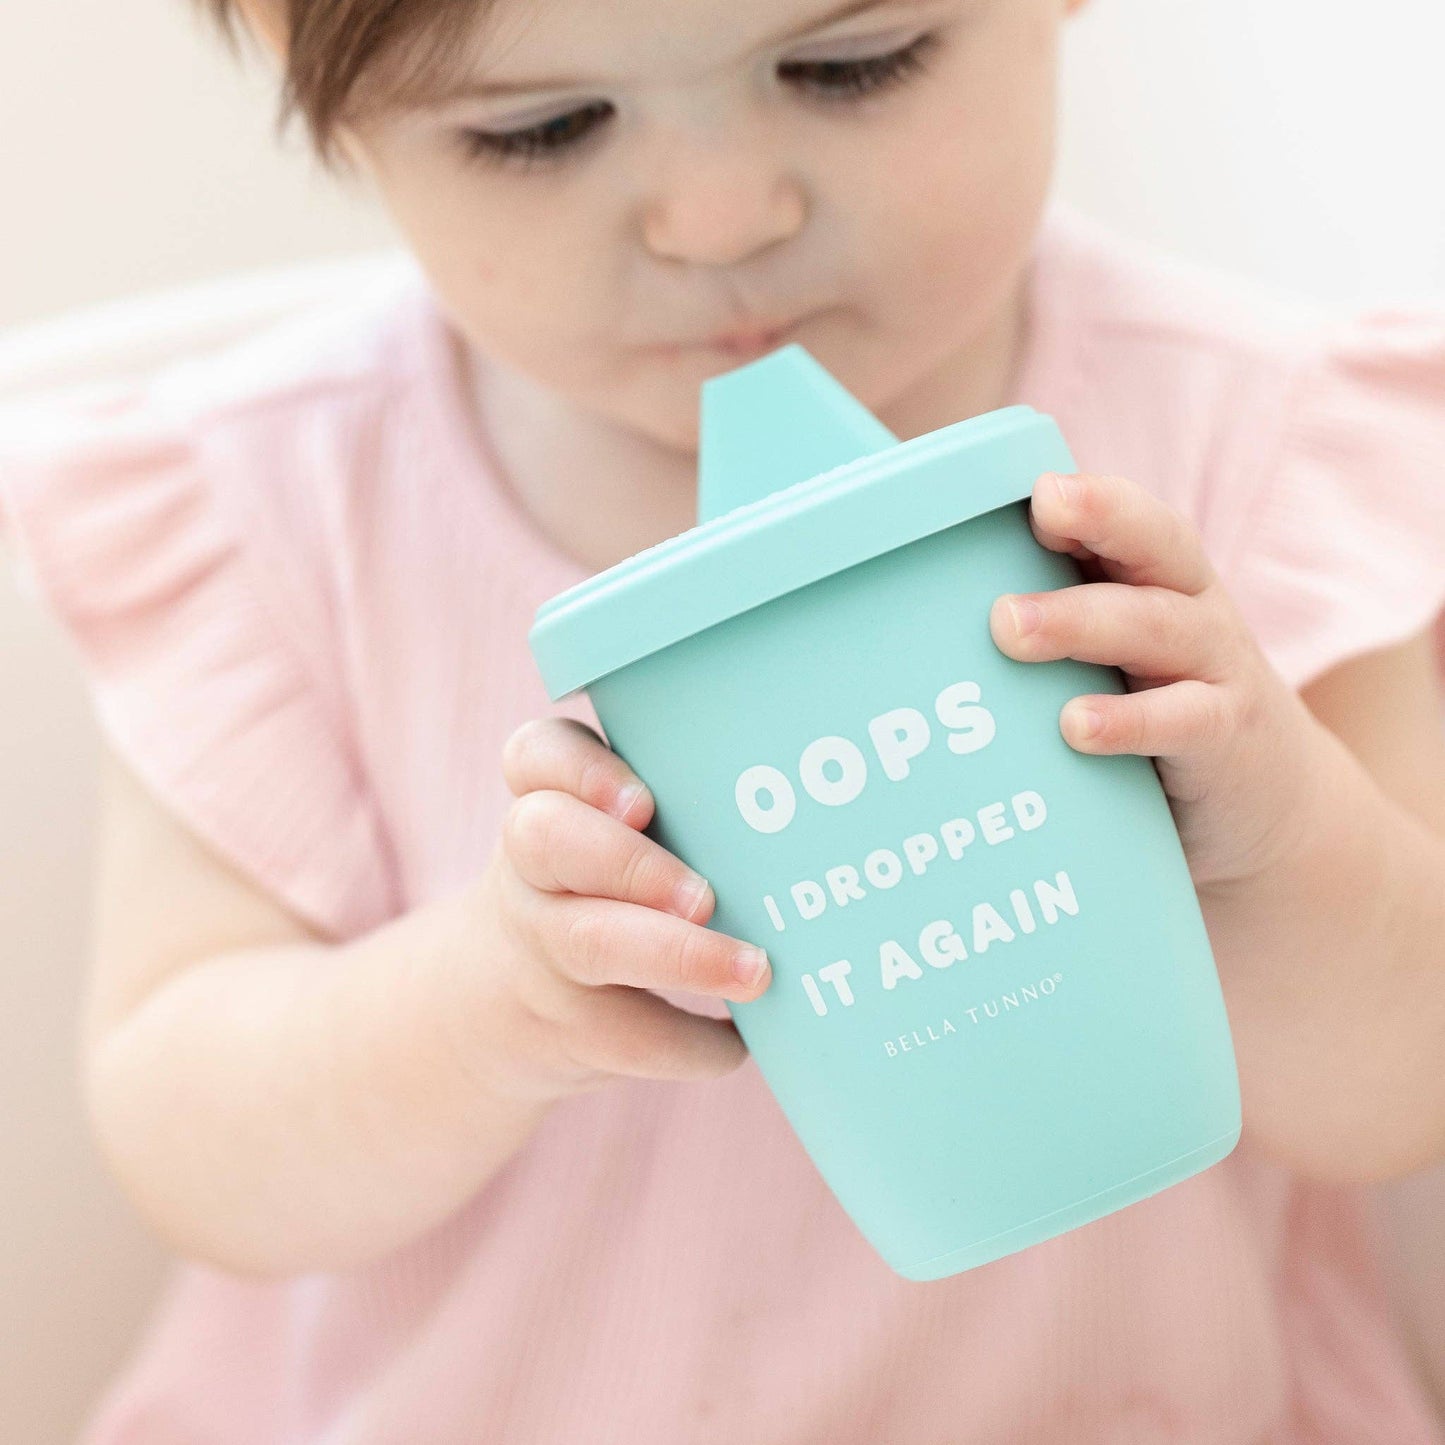 Bella Tunno - Dropped it Again Sippy Cup: Blue